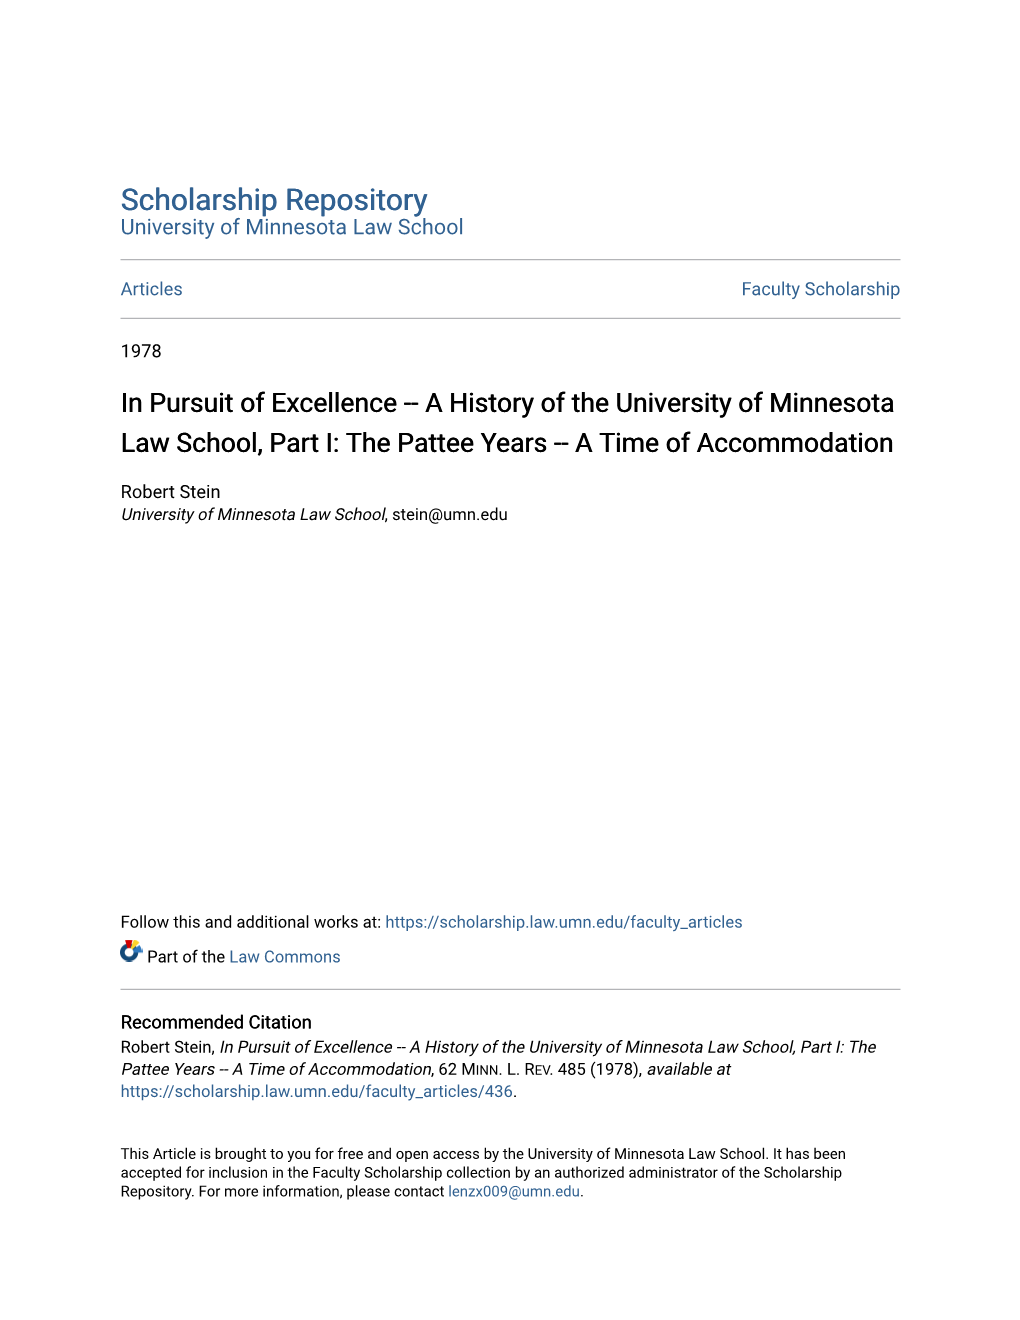 A History of the University of Minnesota Law School, Part I: the Pattee Years -- a Time of Accommodation